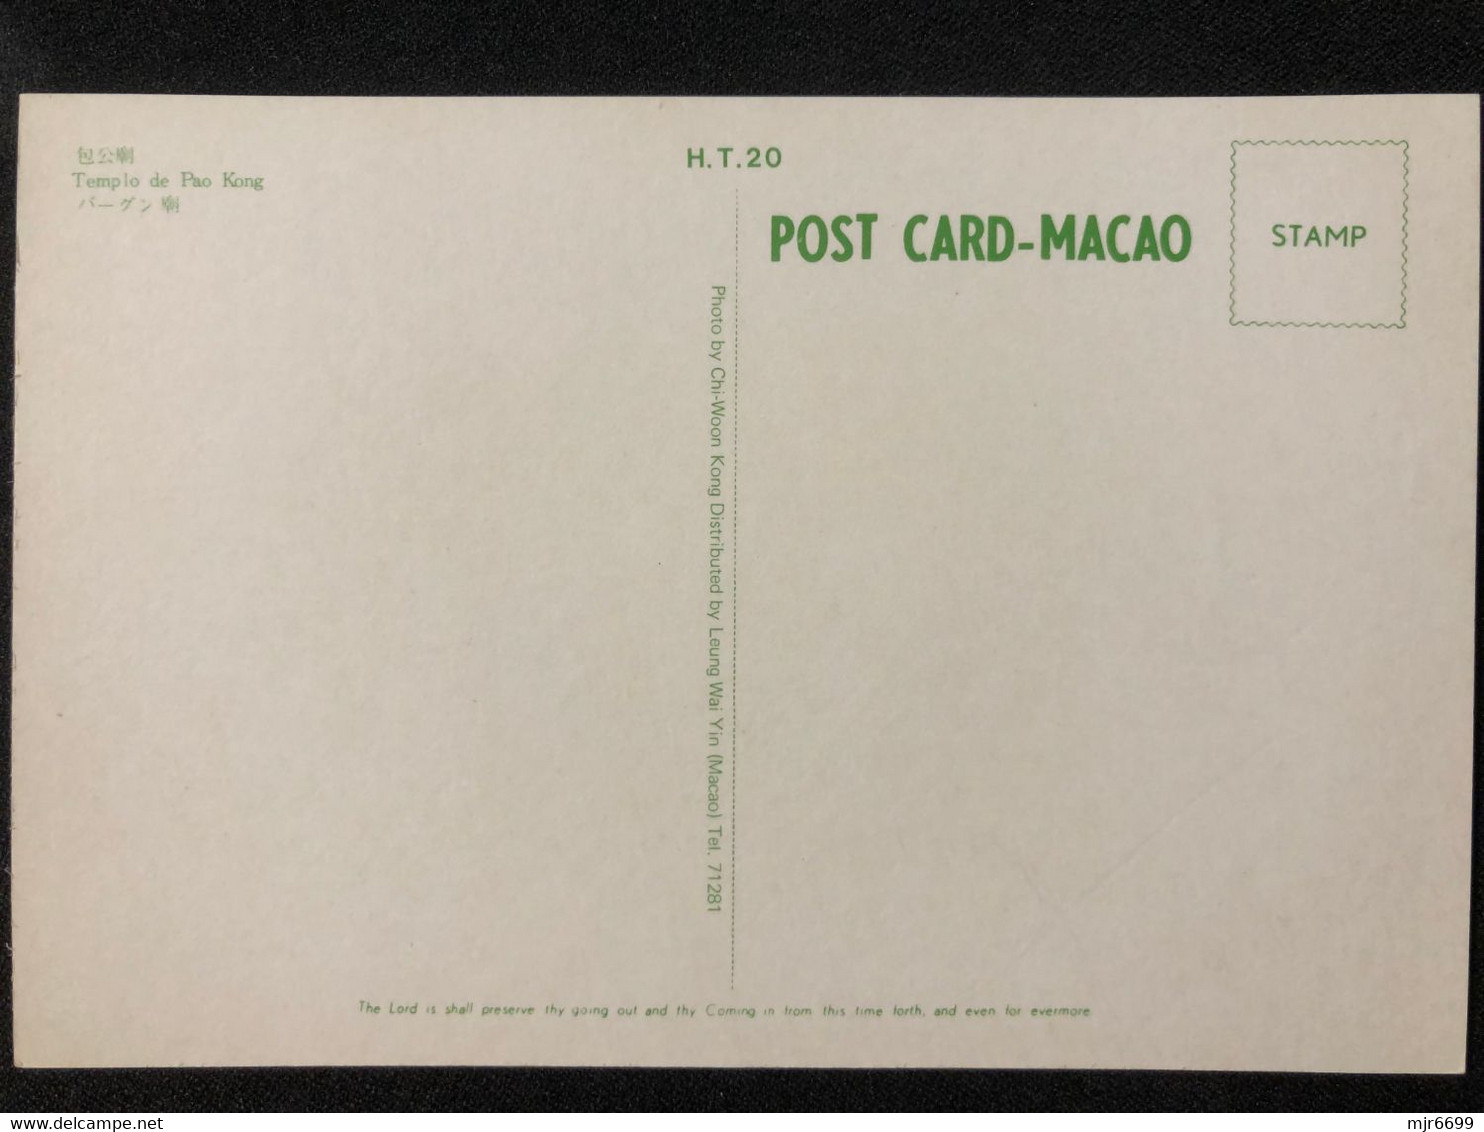 MACAU 1970'S, TEMPLE OF PAO KONG, BOOK STORE PRINTING, SIZE 14,8 X 10CM, #H.T.- 20 - Macao